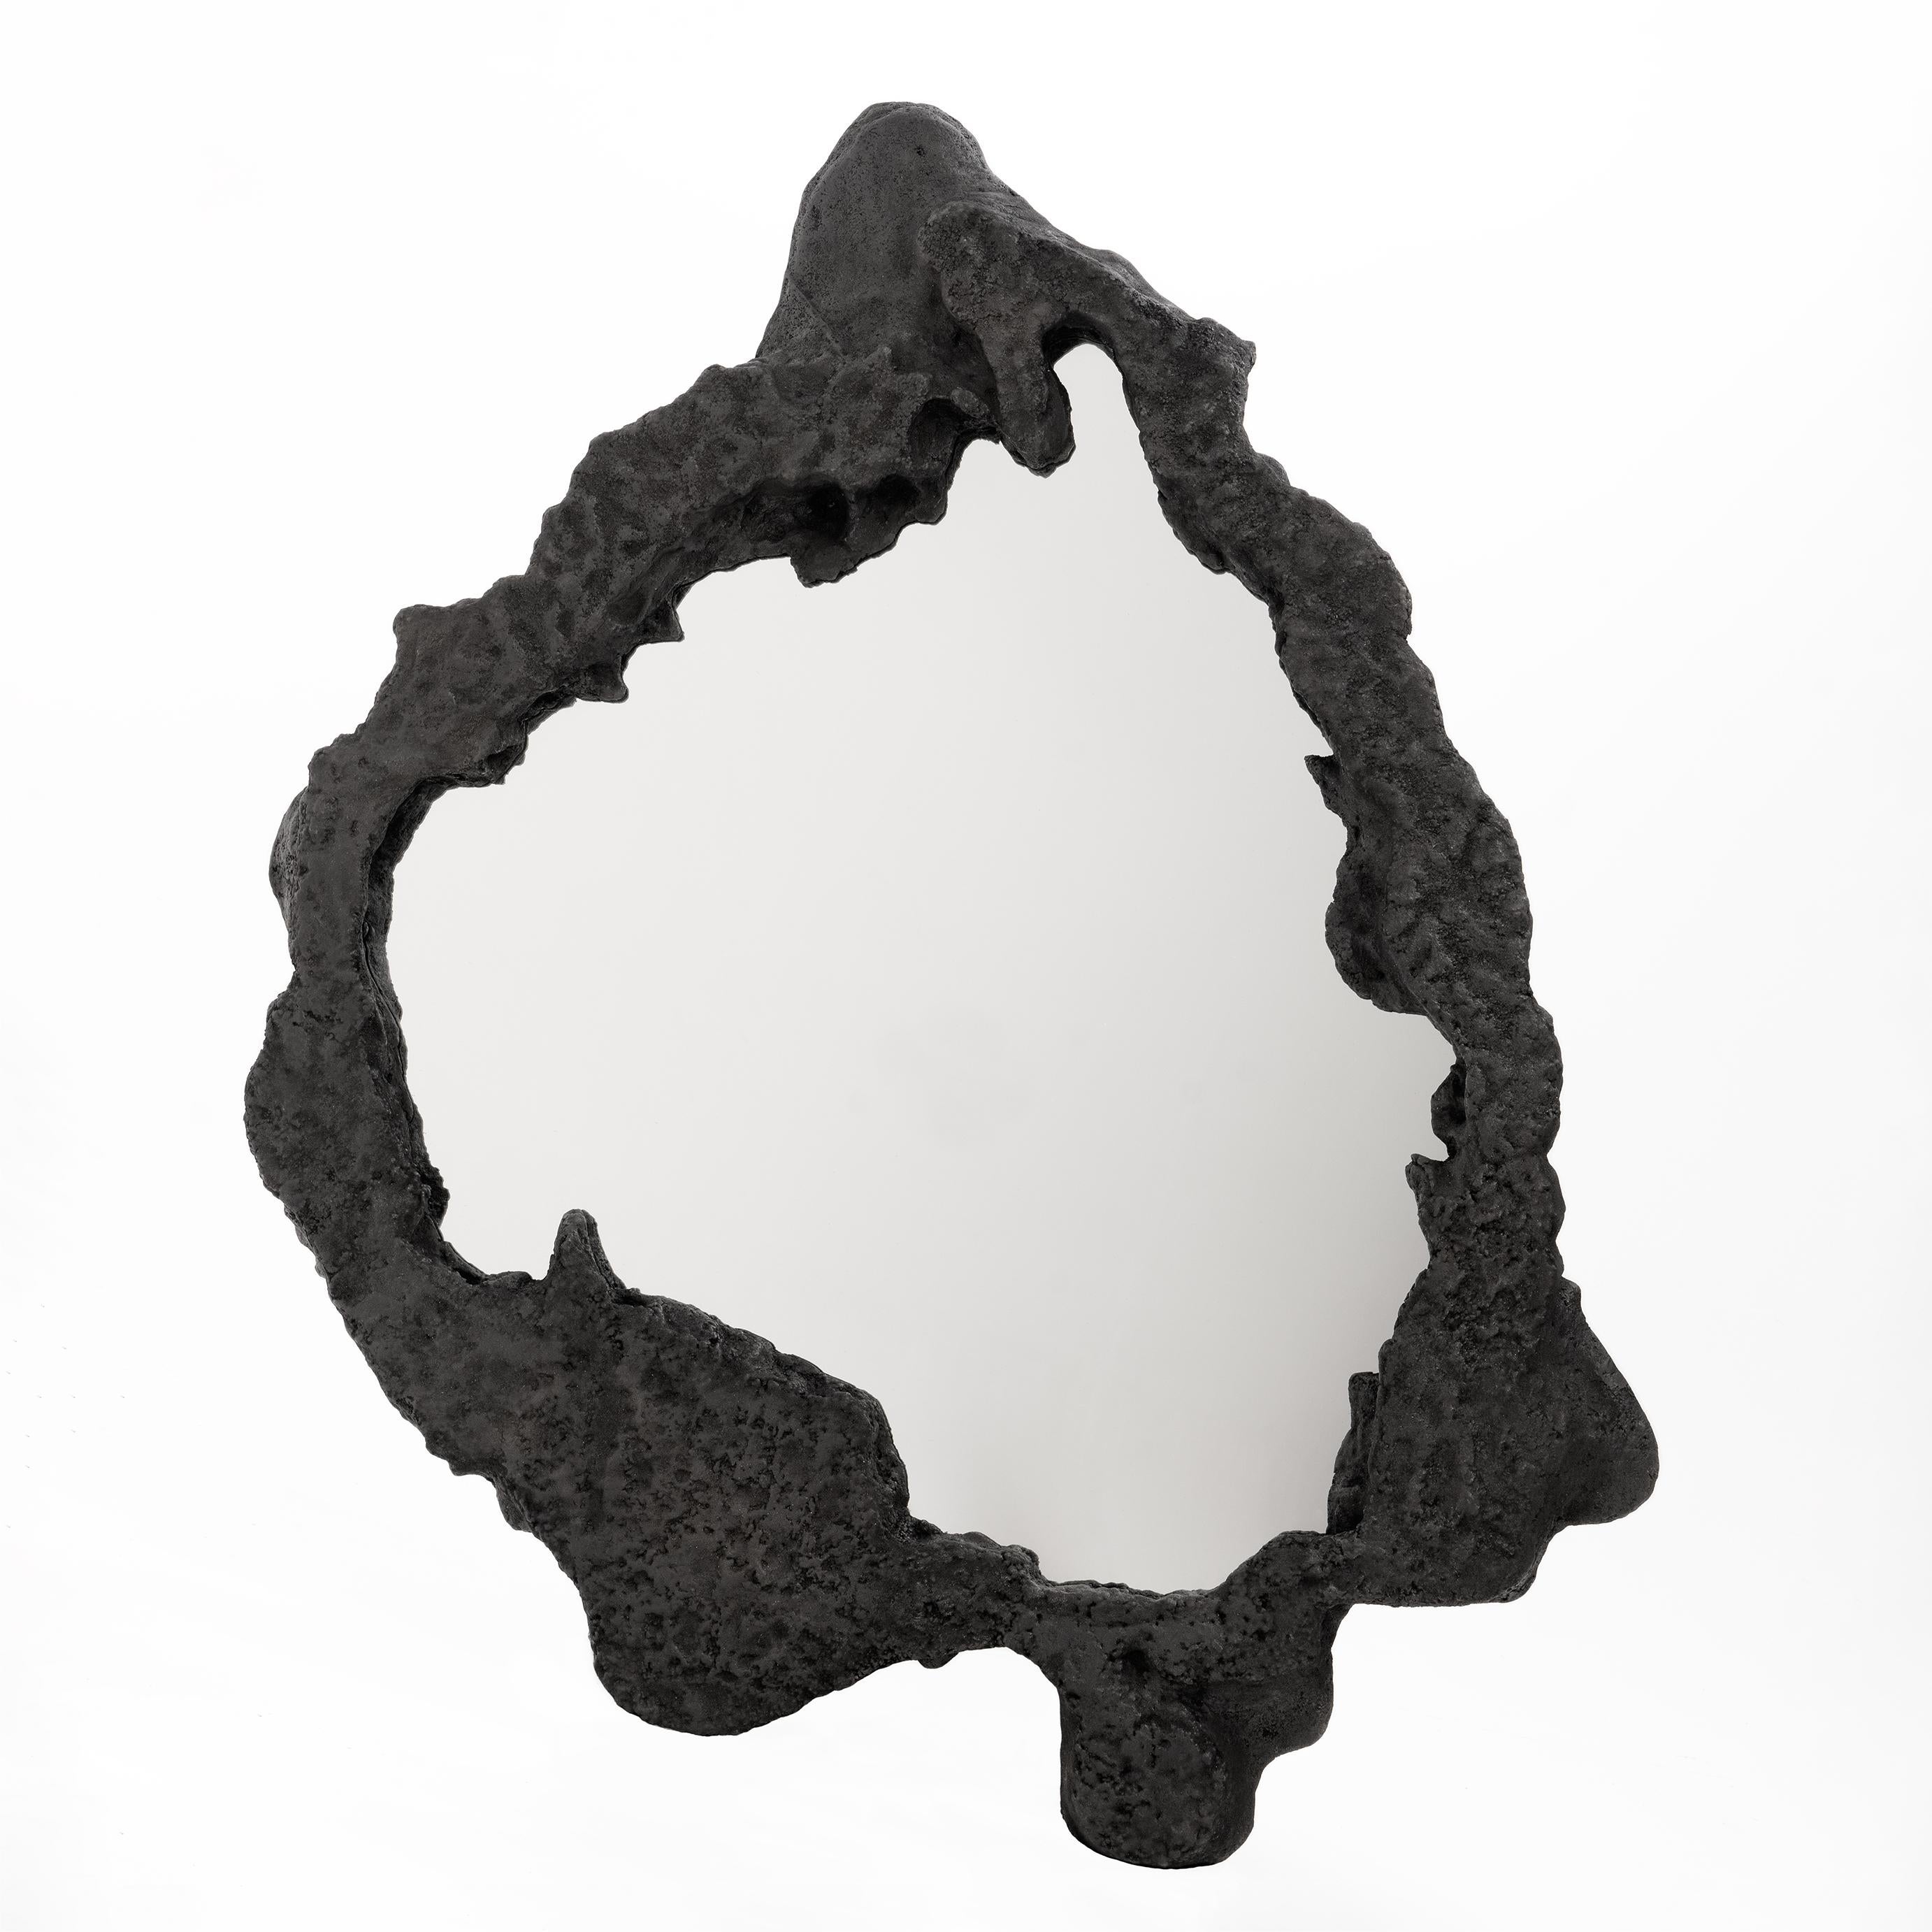 A Beautiful Mind Mirror by Odditi
Dimensions: W 130 x D 7 x H 145 cm
Materials: Onyx, Granite and Basalt composite

Reflecting visions of sedimentary rock formations, our ‘A beautiful Mind’ mirror exhibits the beauty and power of raw